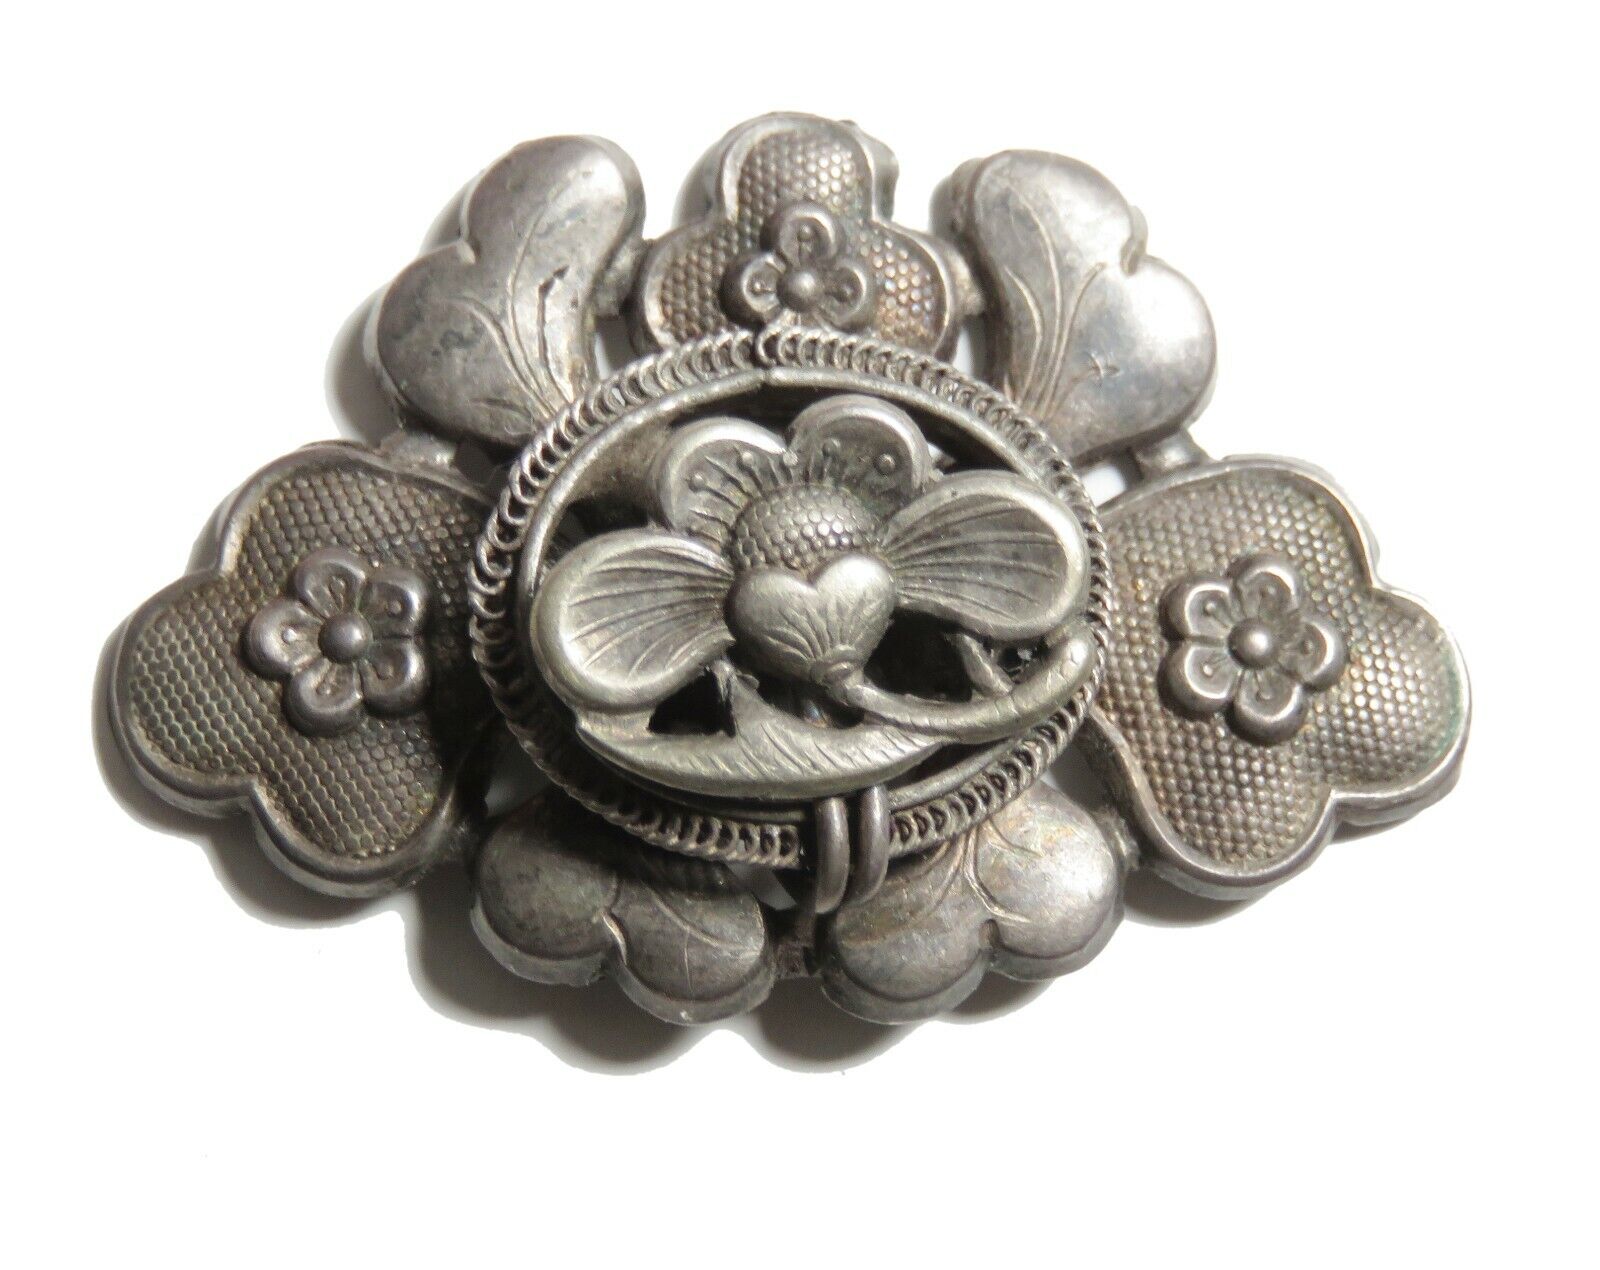 Antique Chinese Asian Silver ornament button piece floral ornate ornament